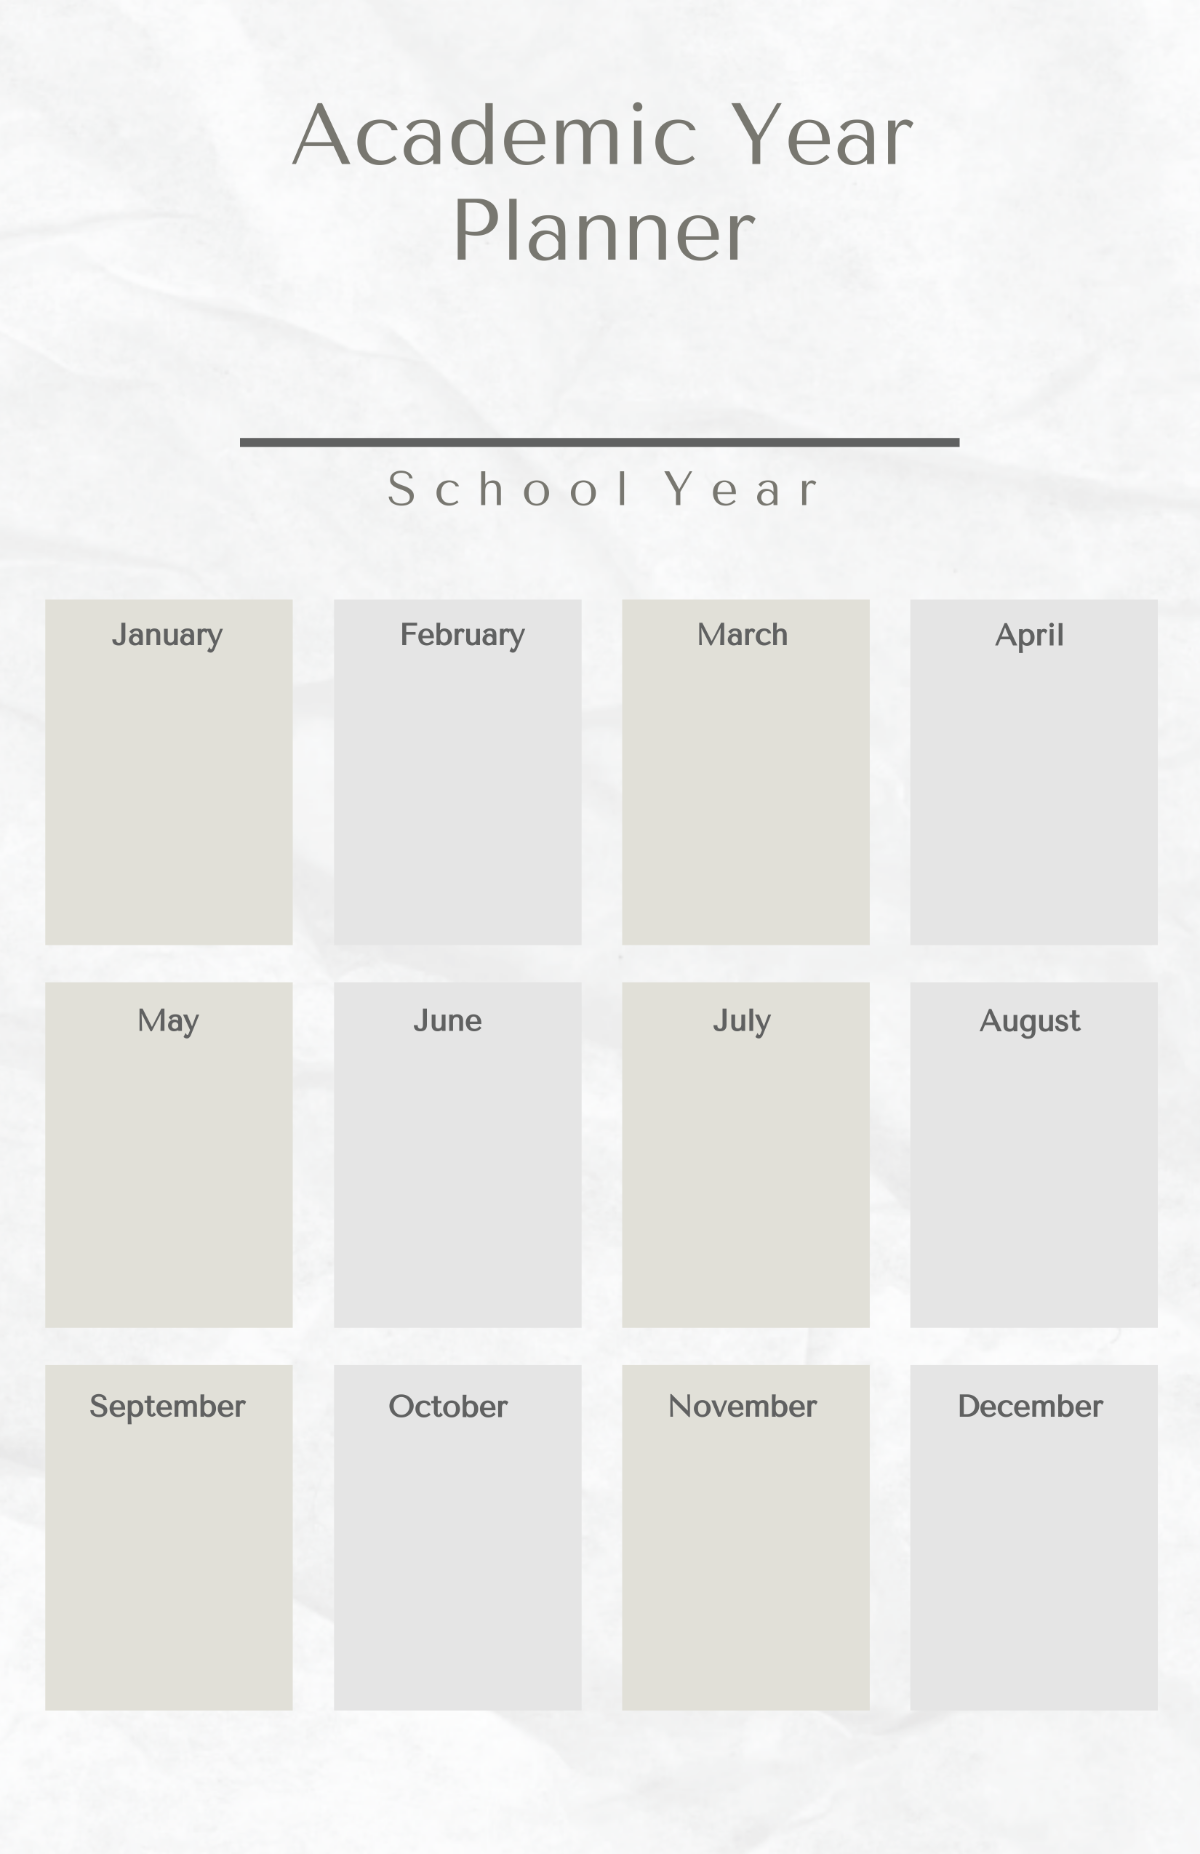 Academic Year Planner Poster Template